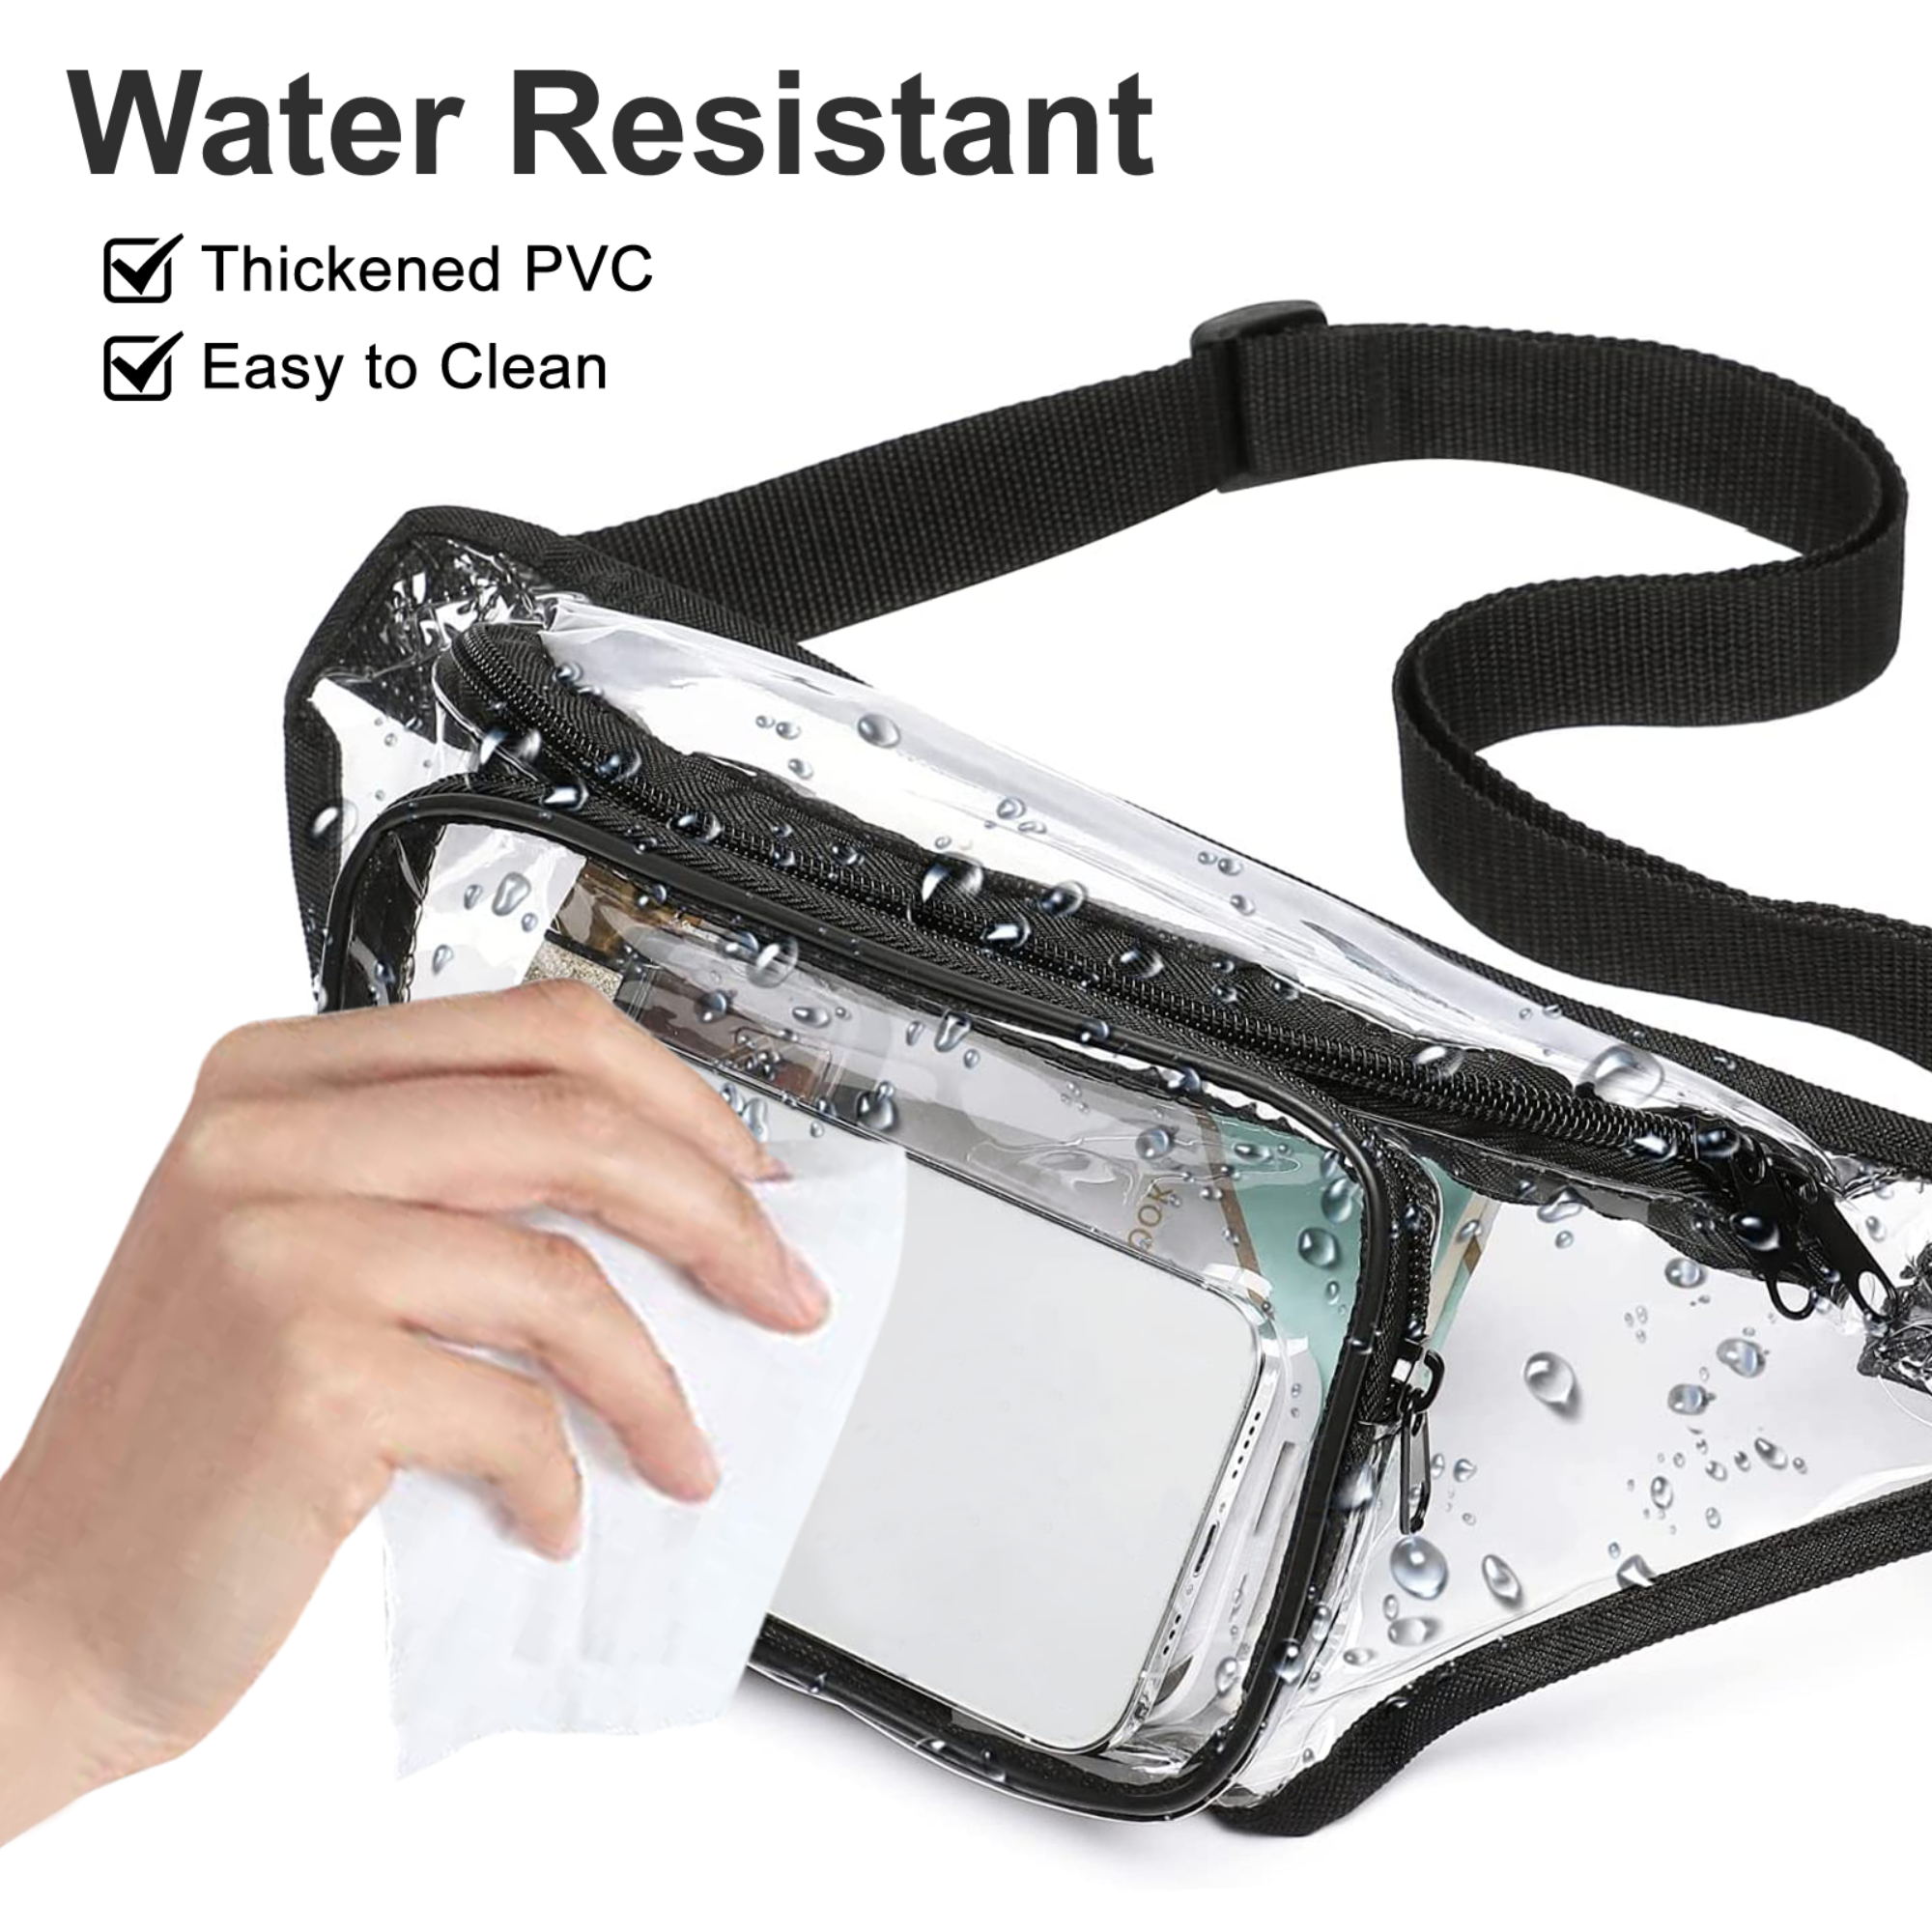 Clear Fanny Pack, EEEkit Waterproof Waist Bag for Stadium and Concerts, Chest Bag with Adjustable Belt Bag for Women Men - image 4 of 8